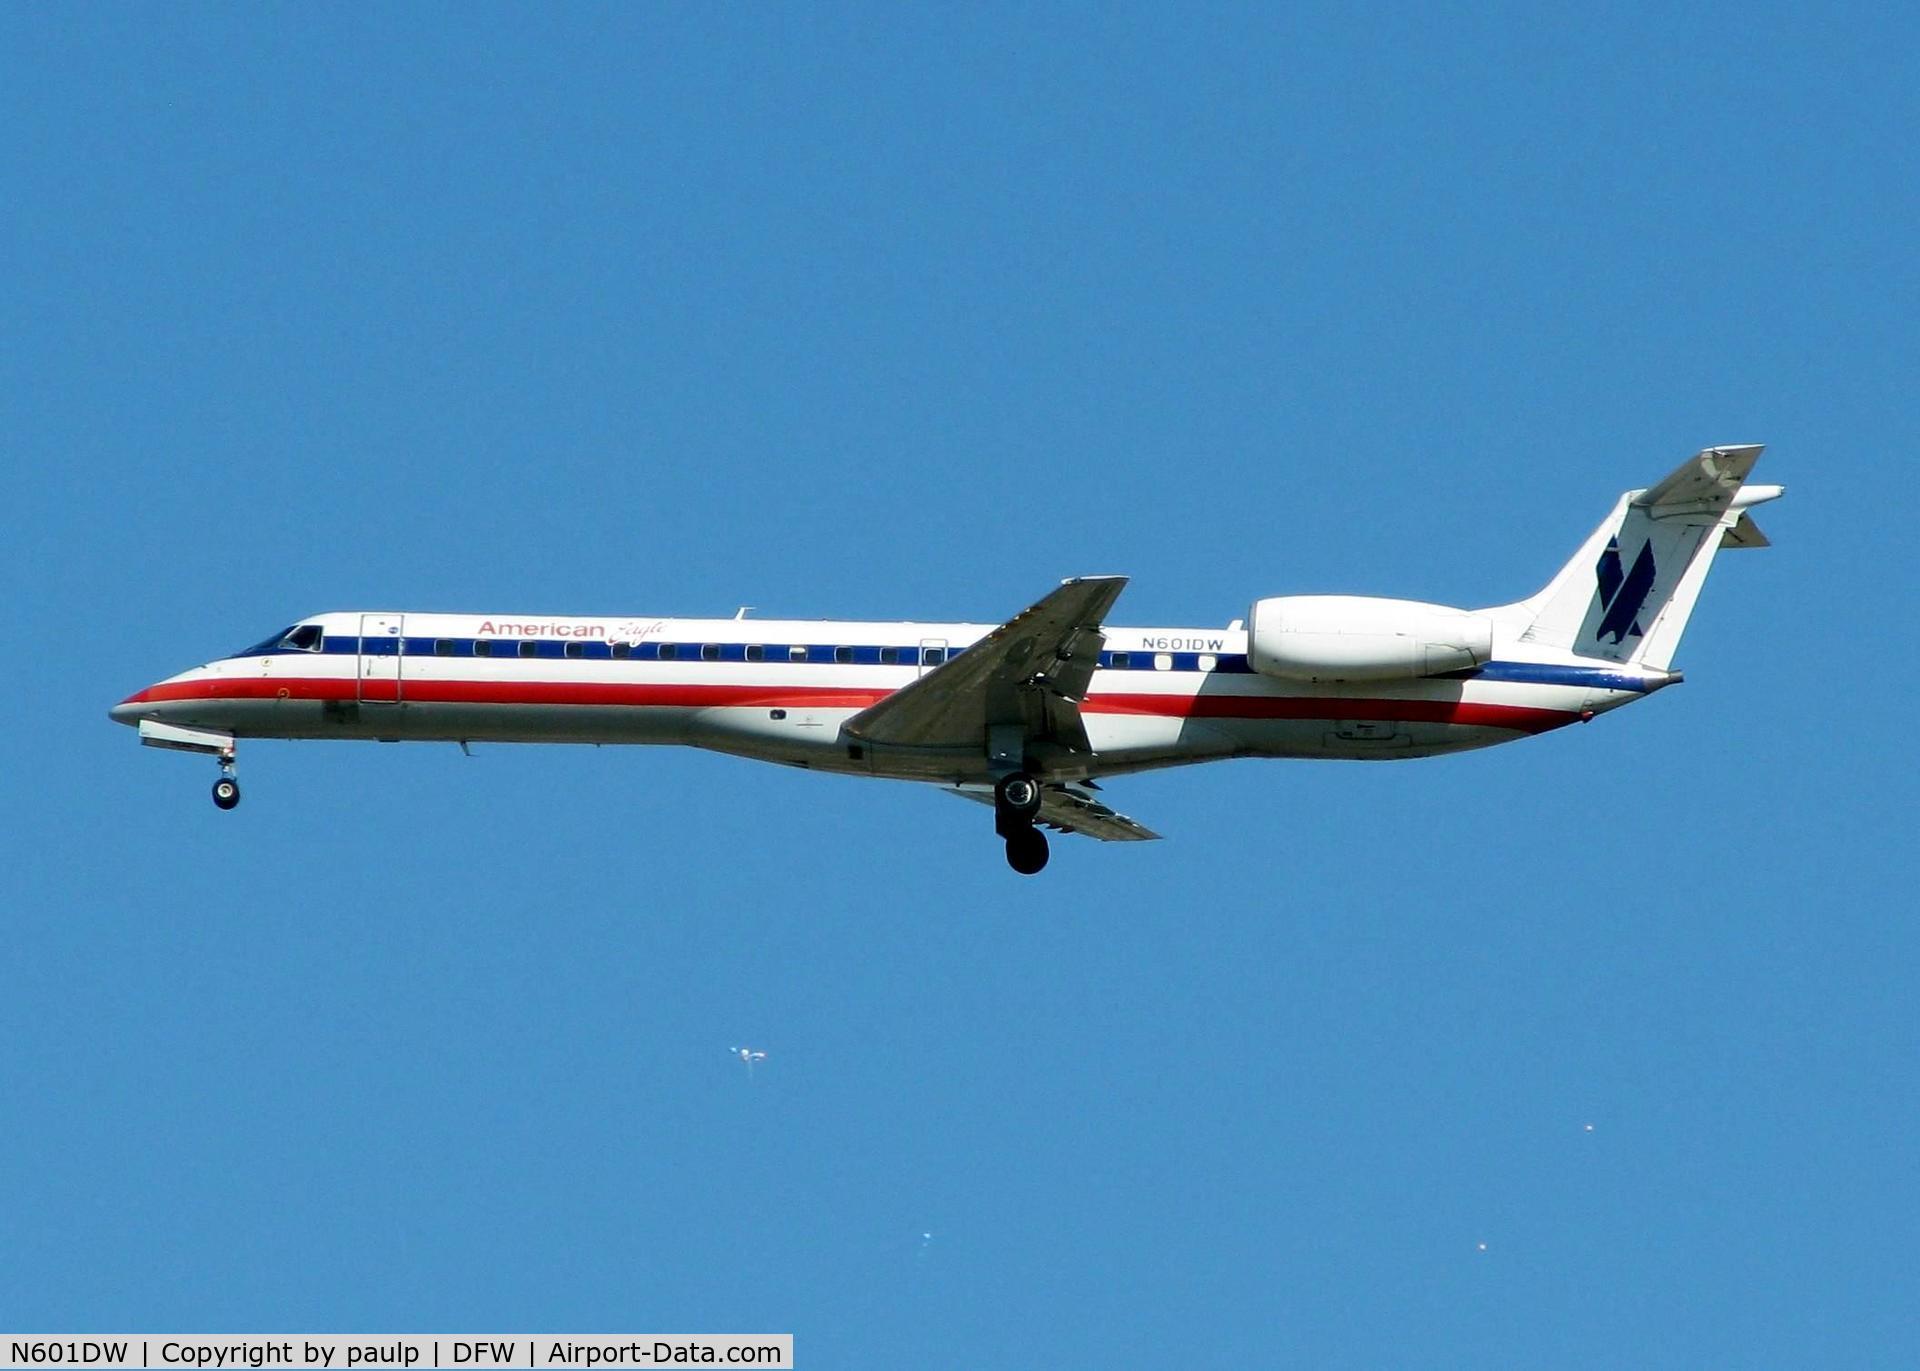 N601DW, 1998 Embraer ERJ-145LR (EMB-145LR) C/N 145046, Landing at DFW. I didn't see all the balloons when I was shooting?